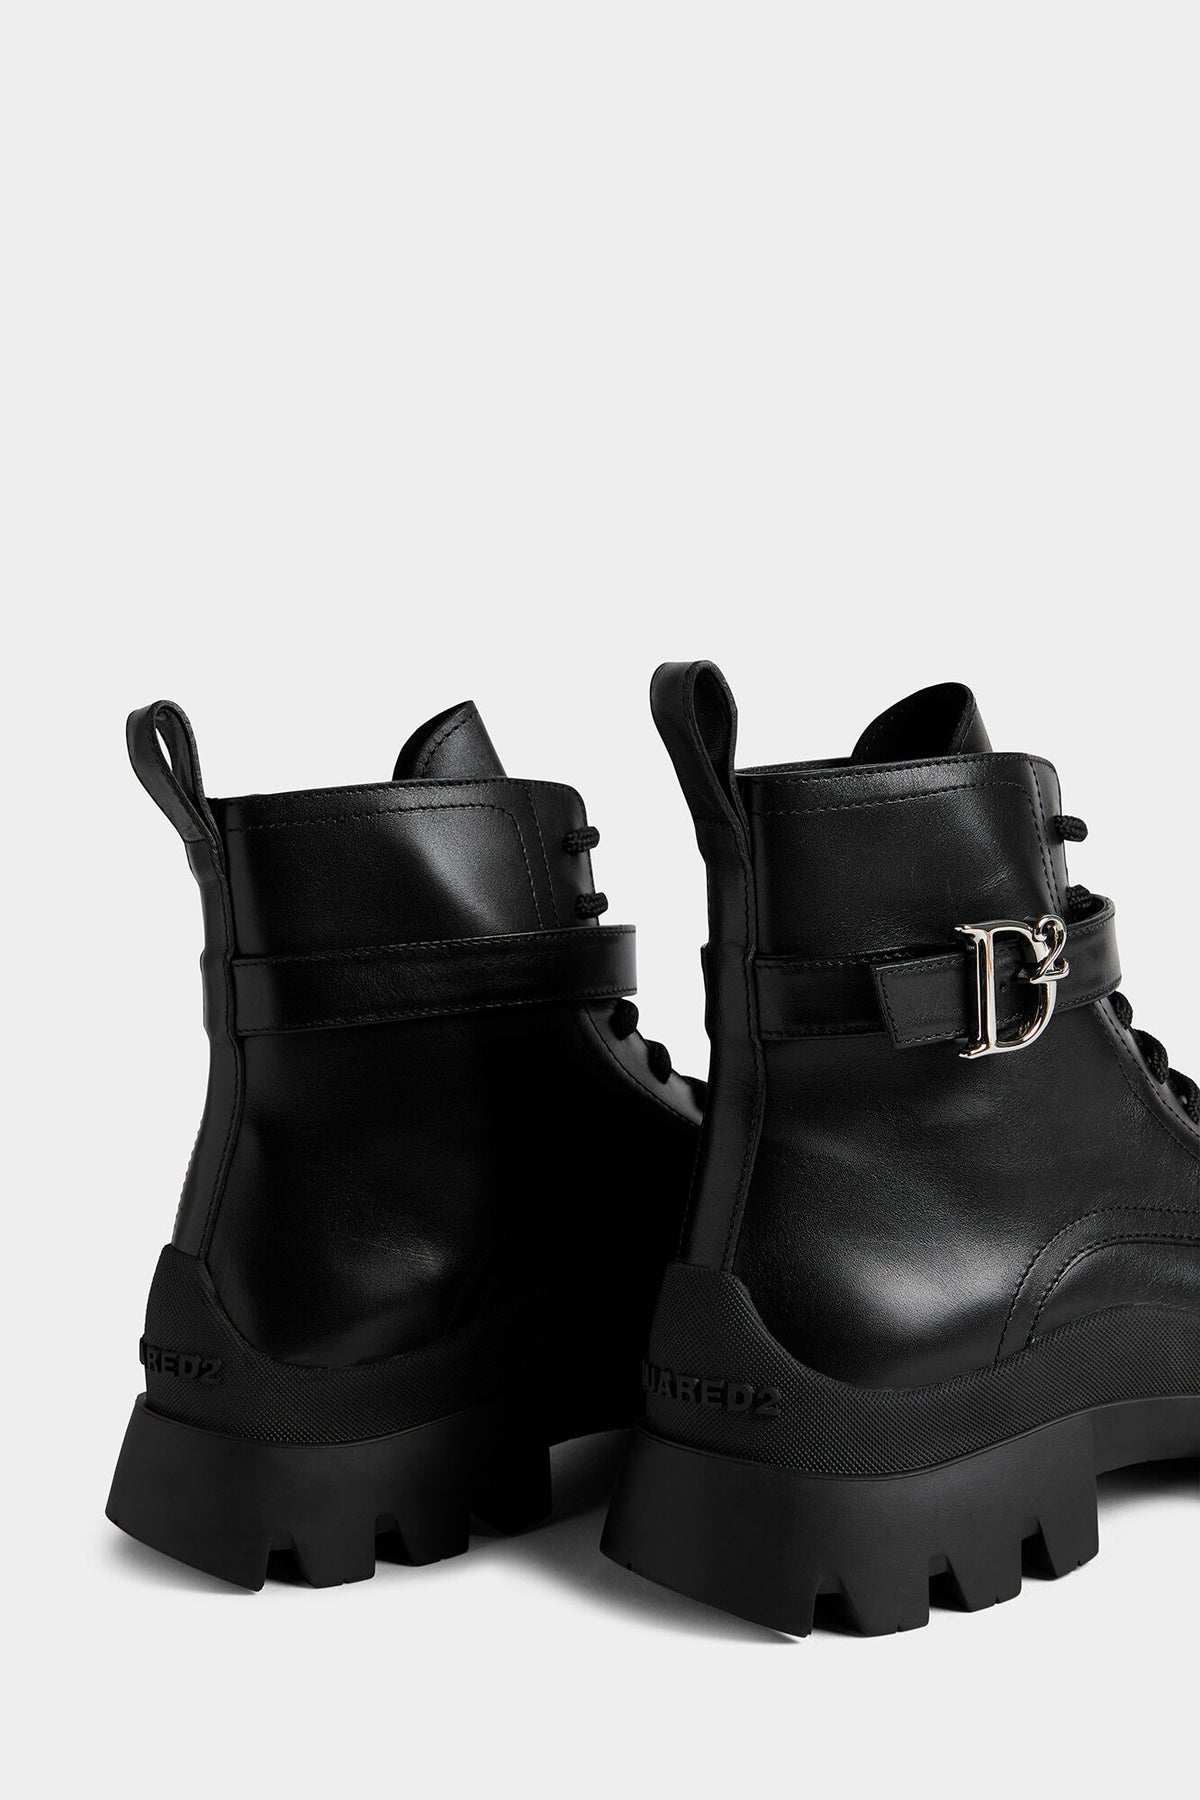 D2 Statement Ankle Boots